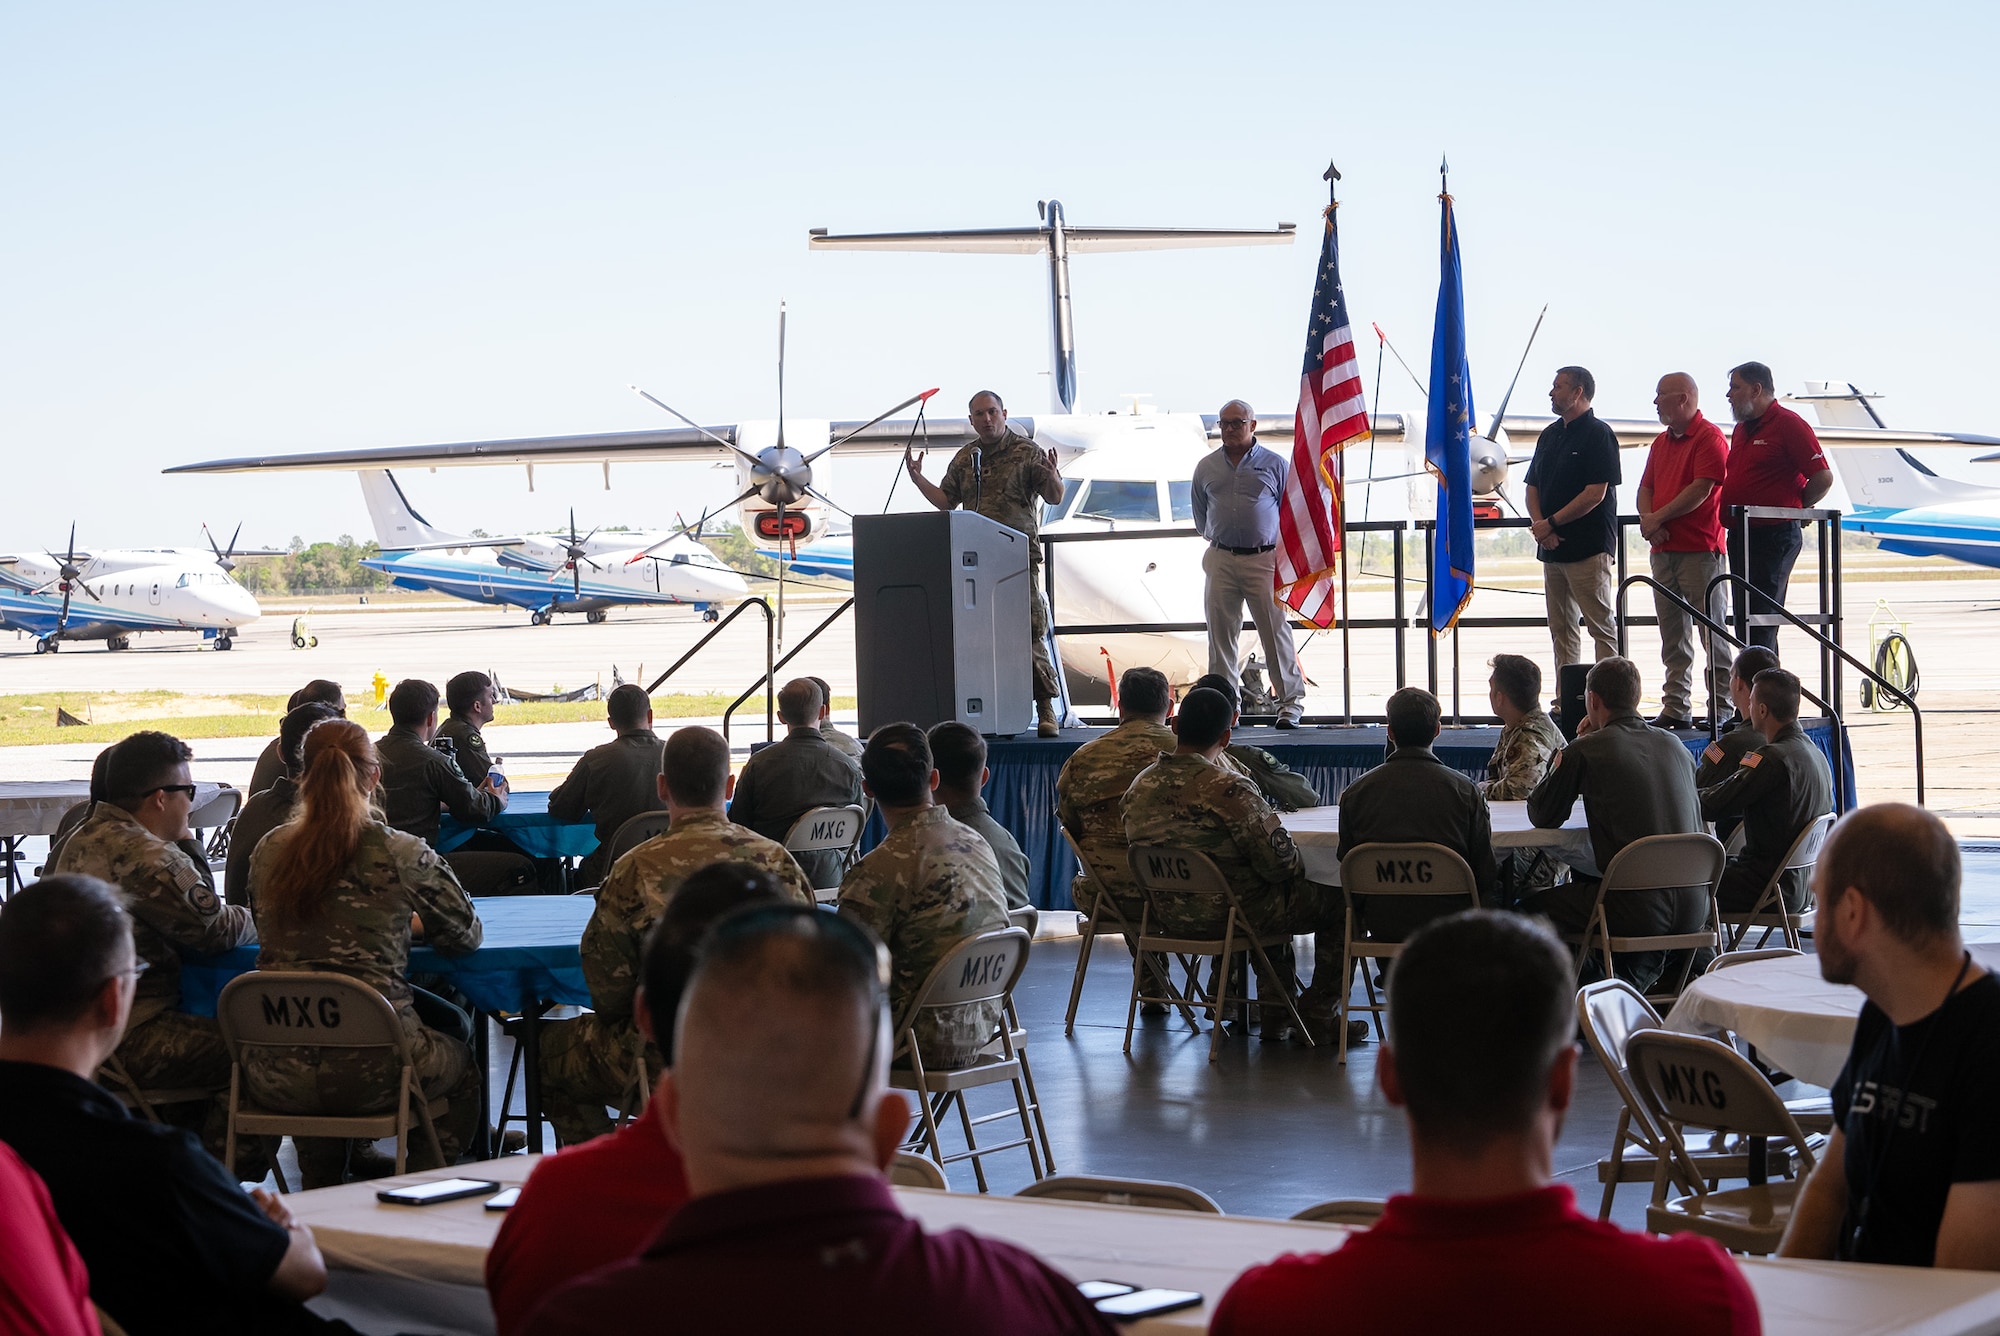 A group of people stand on a stage give a presentation in front of multiple airframes to a gathering of civilians and military